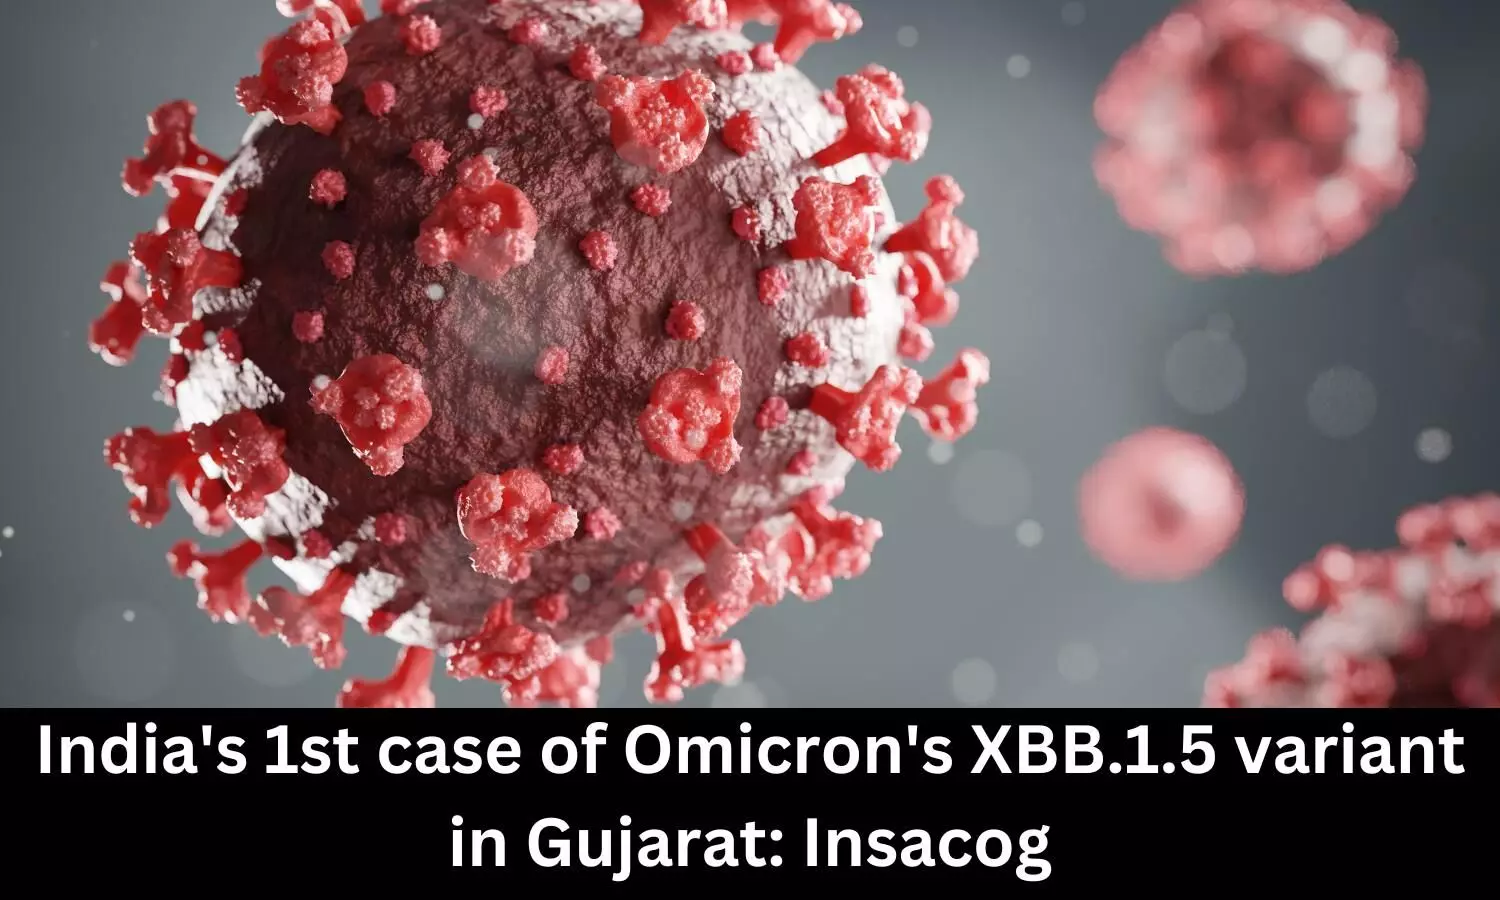 India records 1st case of Omicron XBB.1.5 variant in Gujarat: Insacog